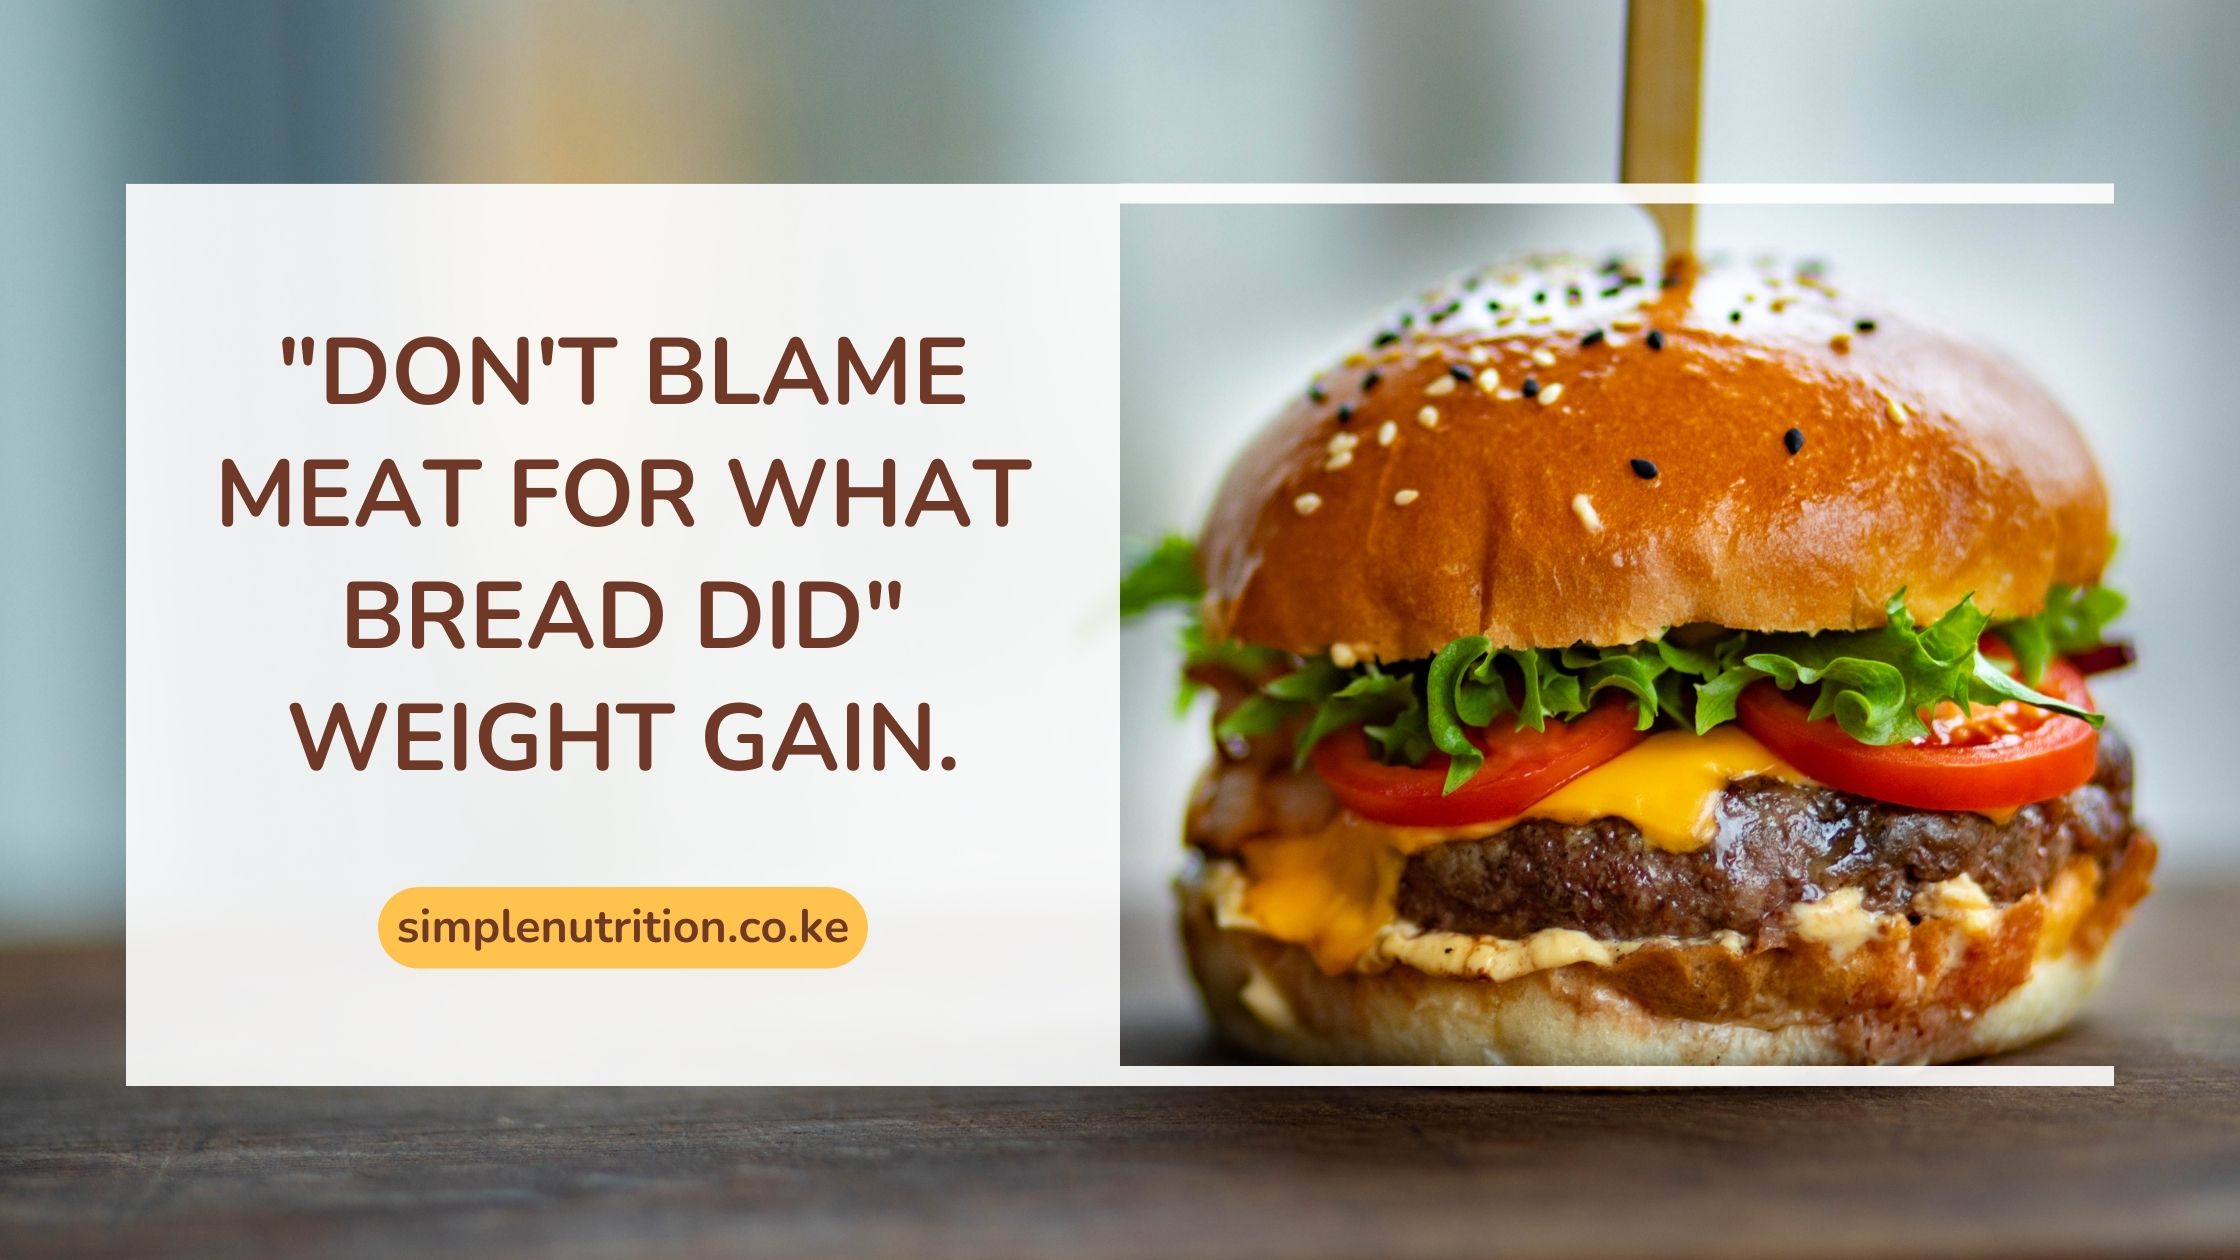 “Don’t blame meat for what bread did” weight gain.